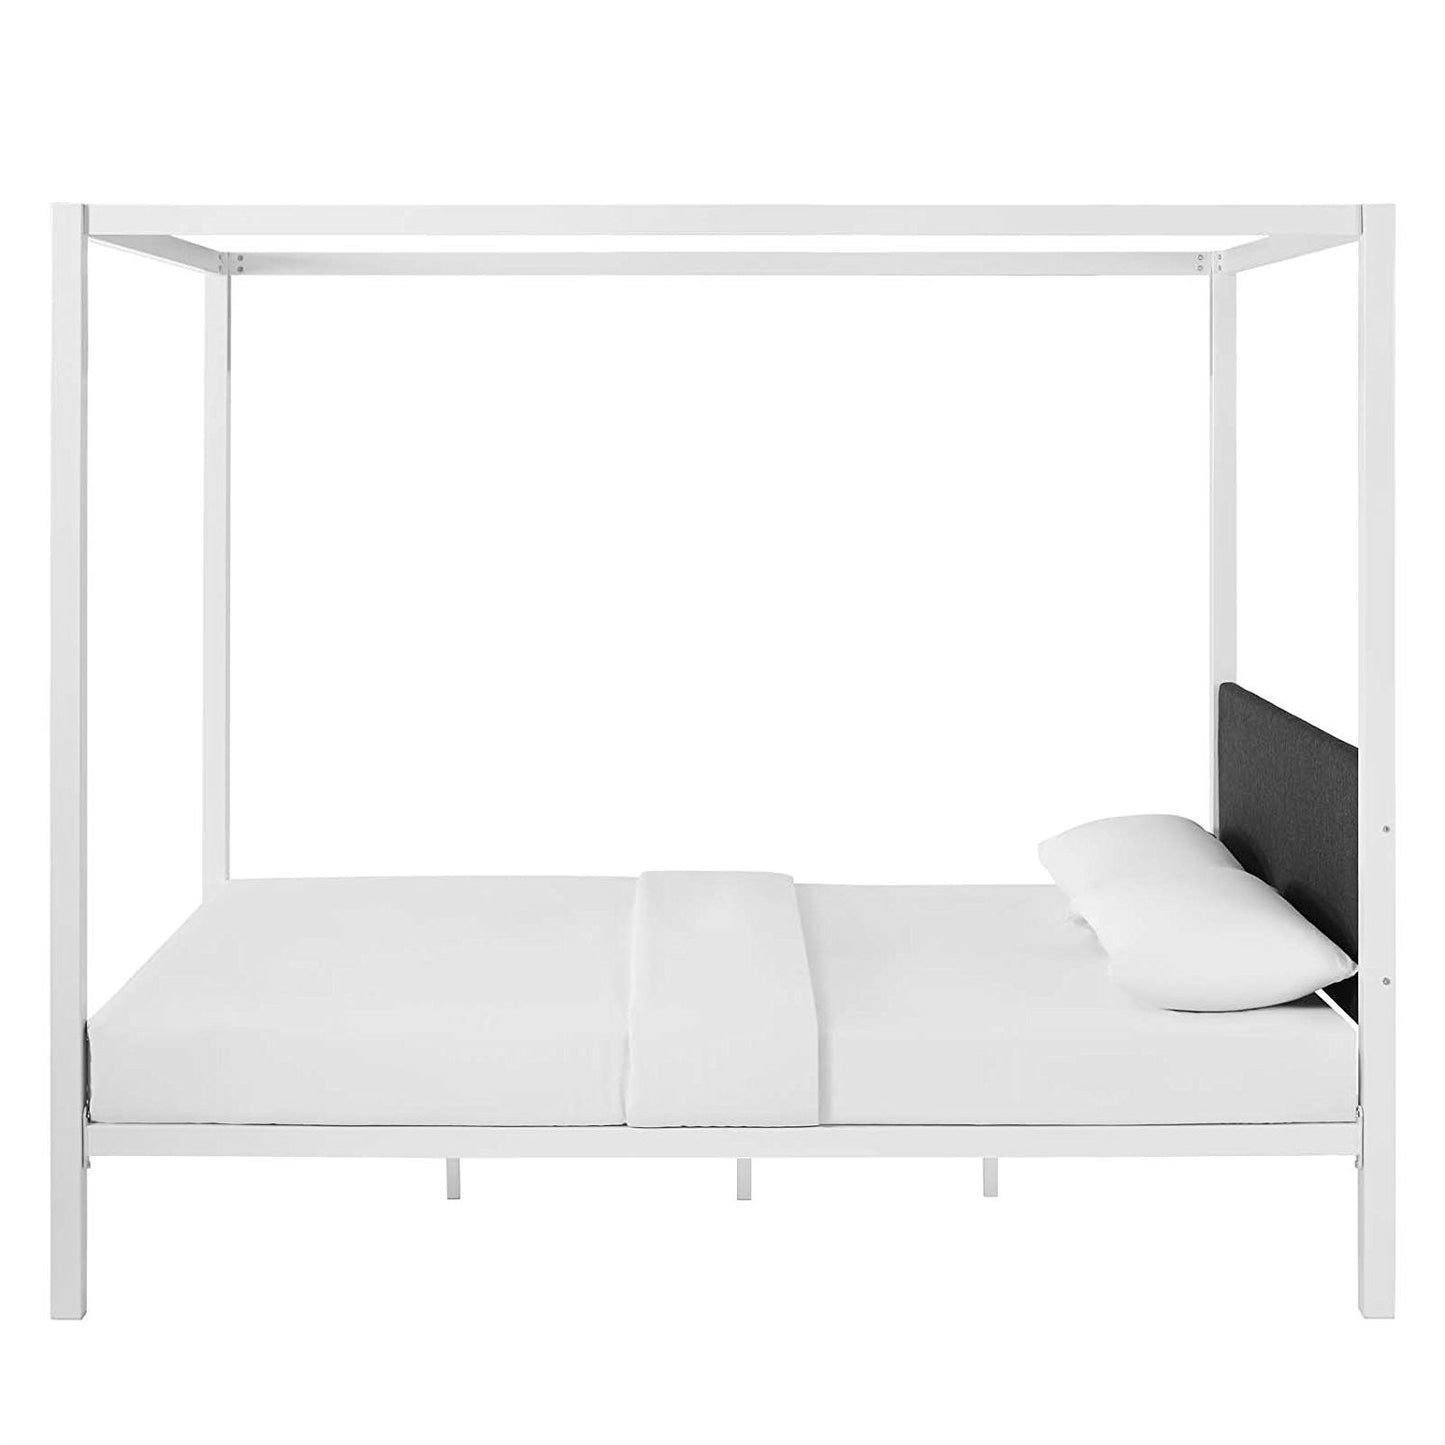 Queen size White Metal Canopy Bed Frame with Grey Fabric Upholstered Headboard